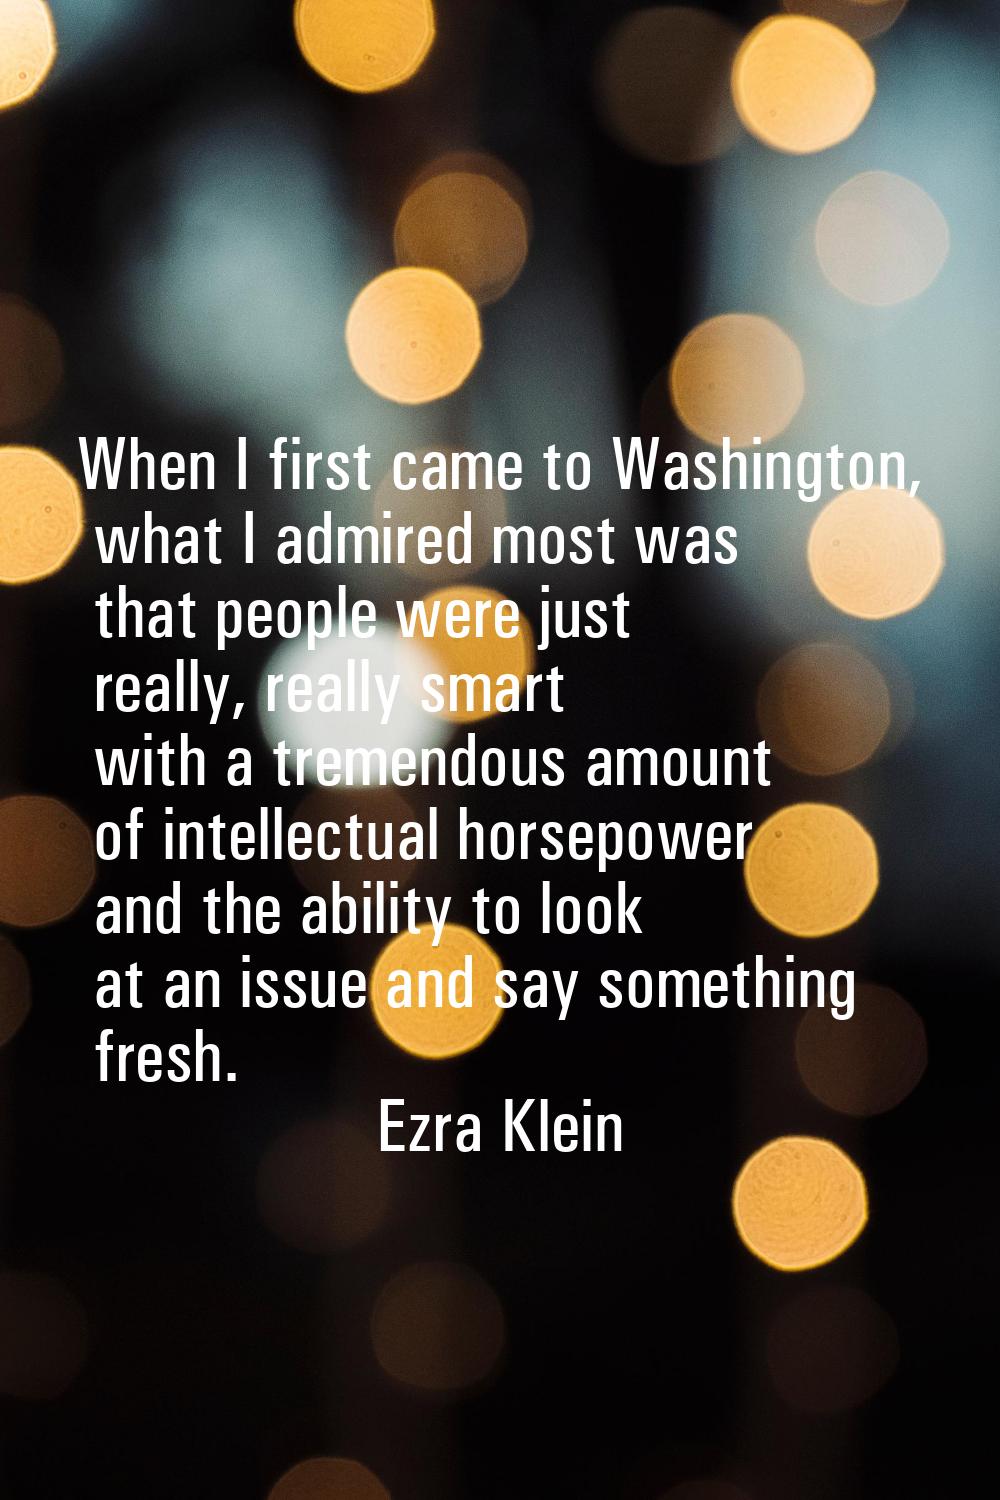 When I first came to Washington, what I admired most was that people were just really, really smart